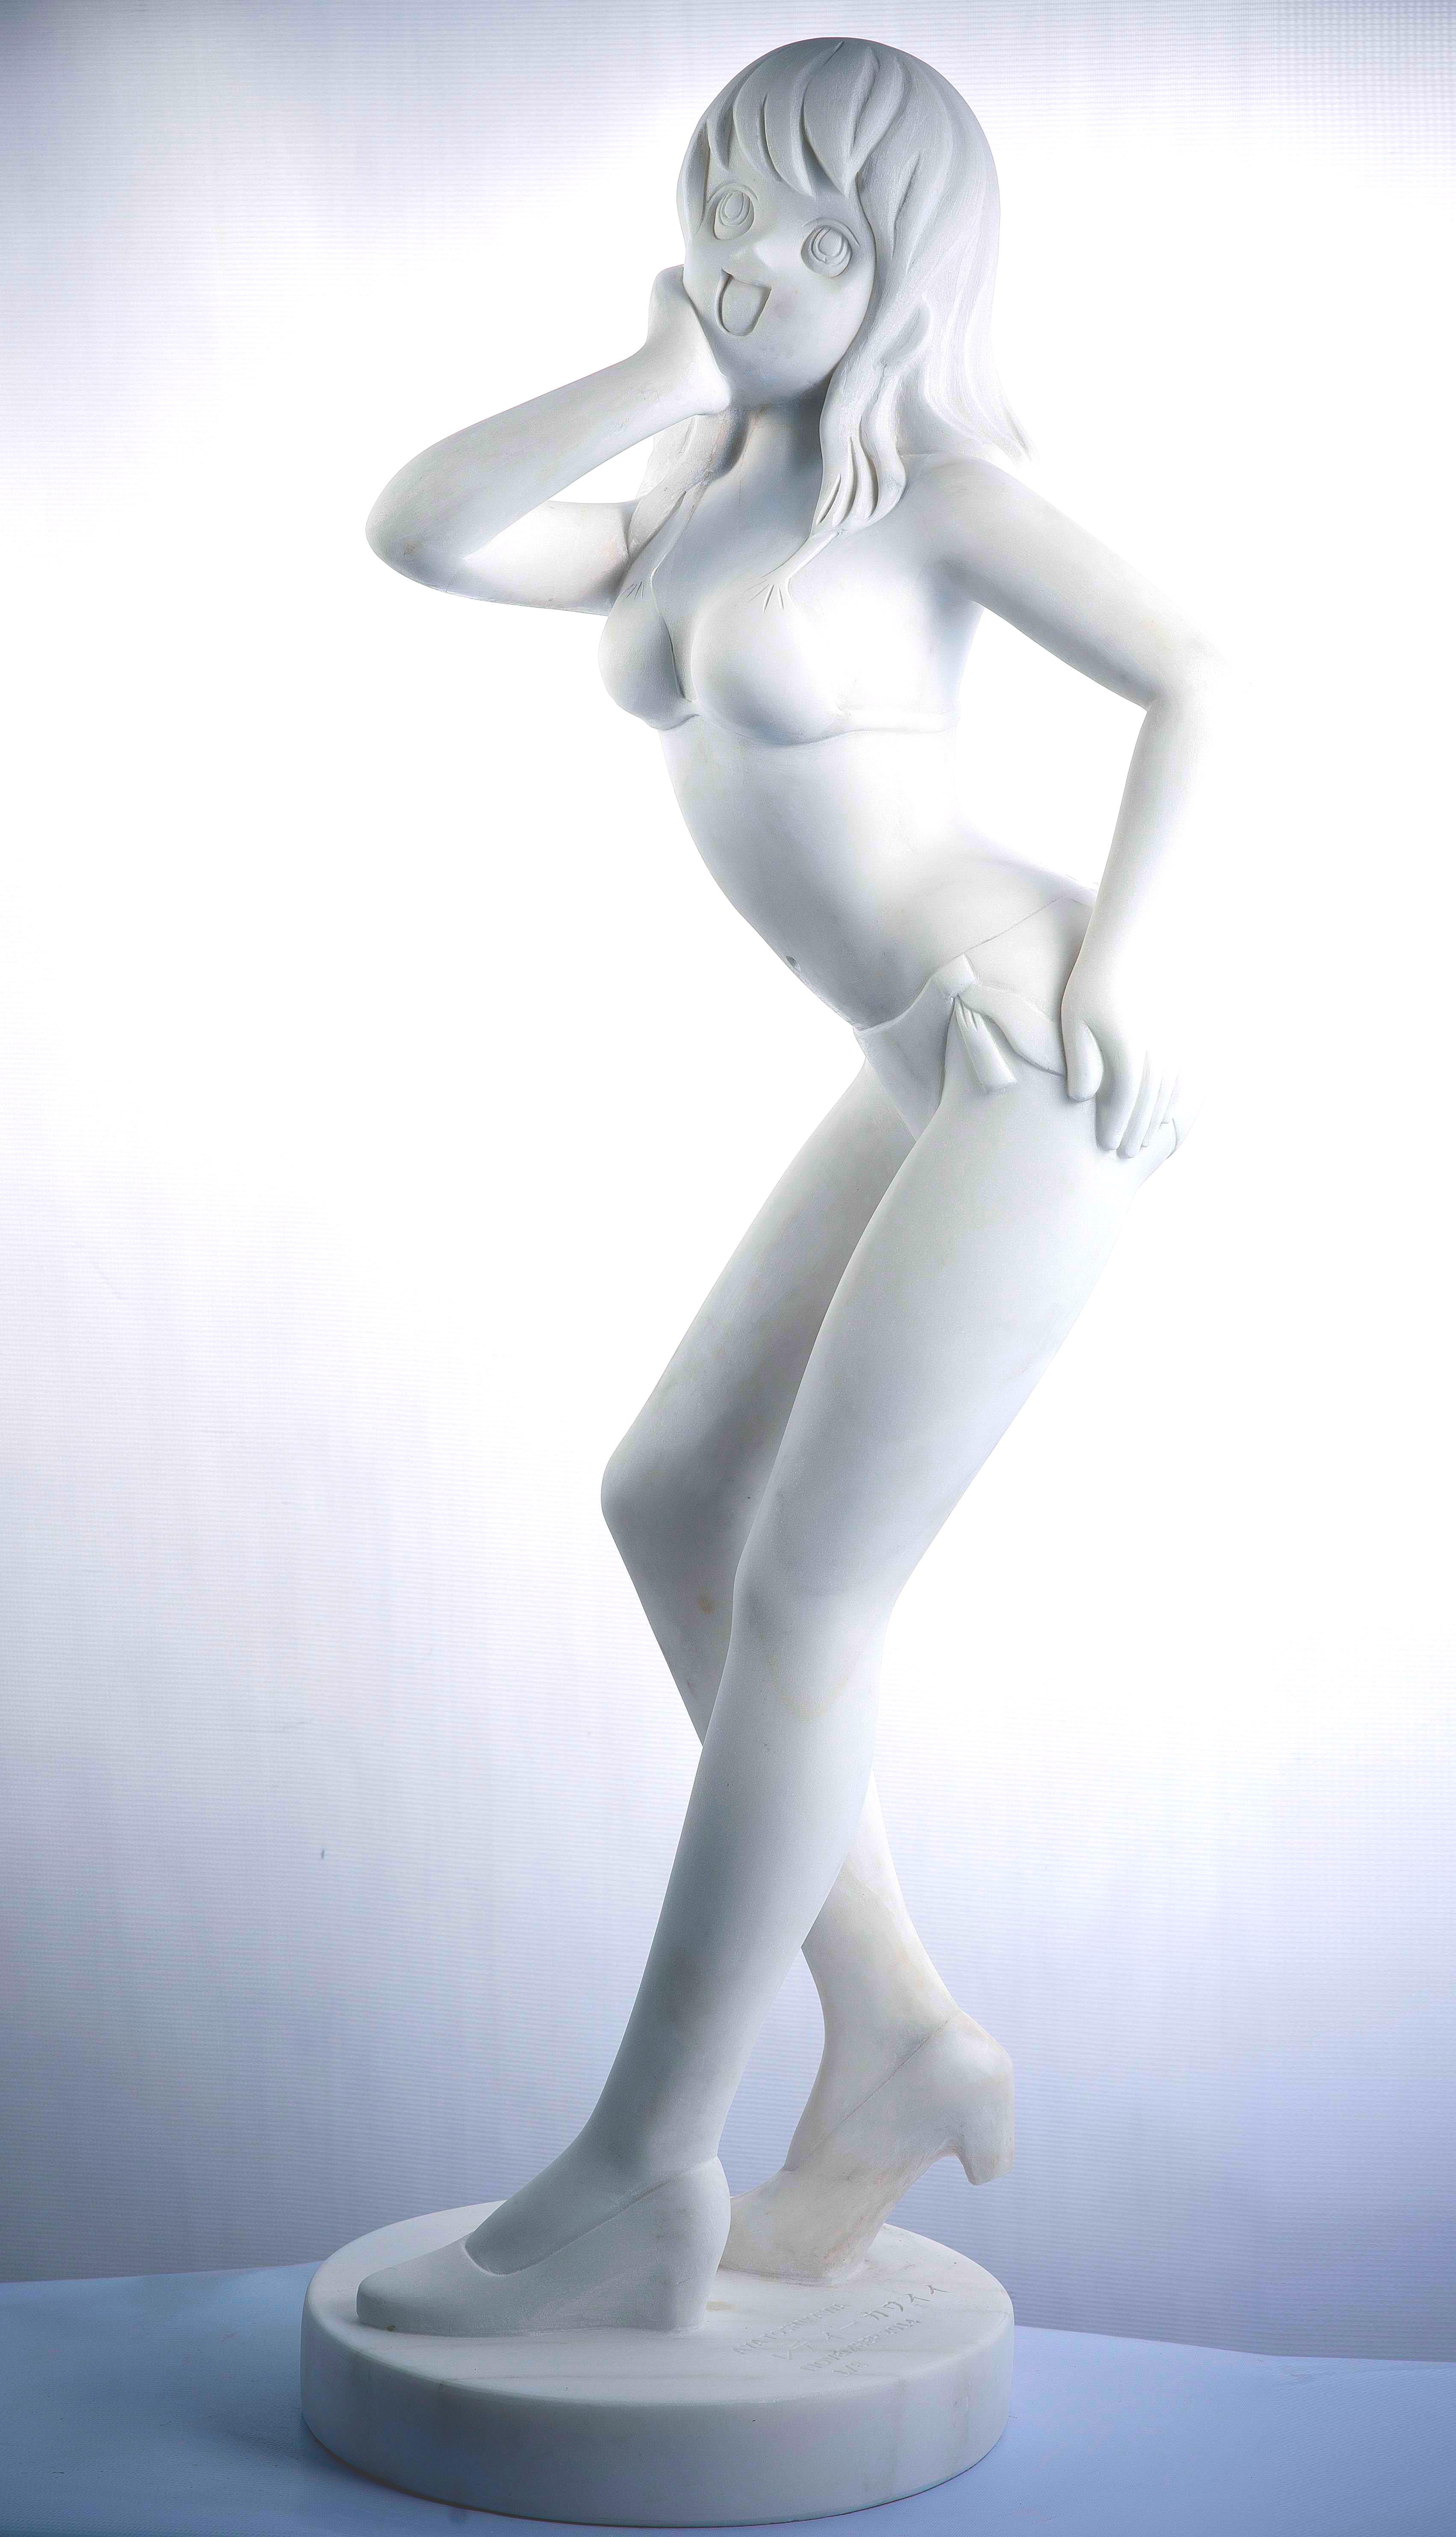 Shuya 5 : Ethereal Temptations and Sculpted Desires - Sculpture by AYA TOSHIKAWA